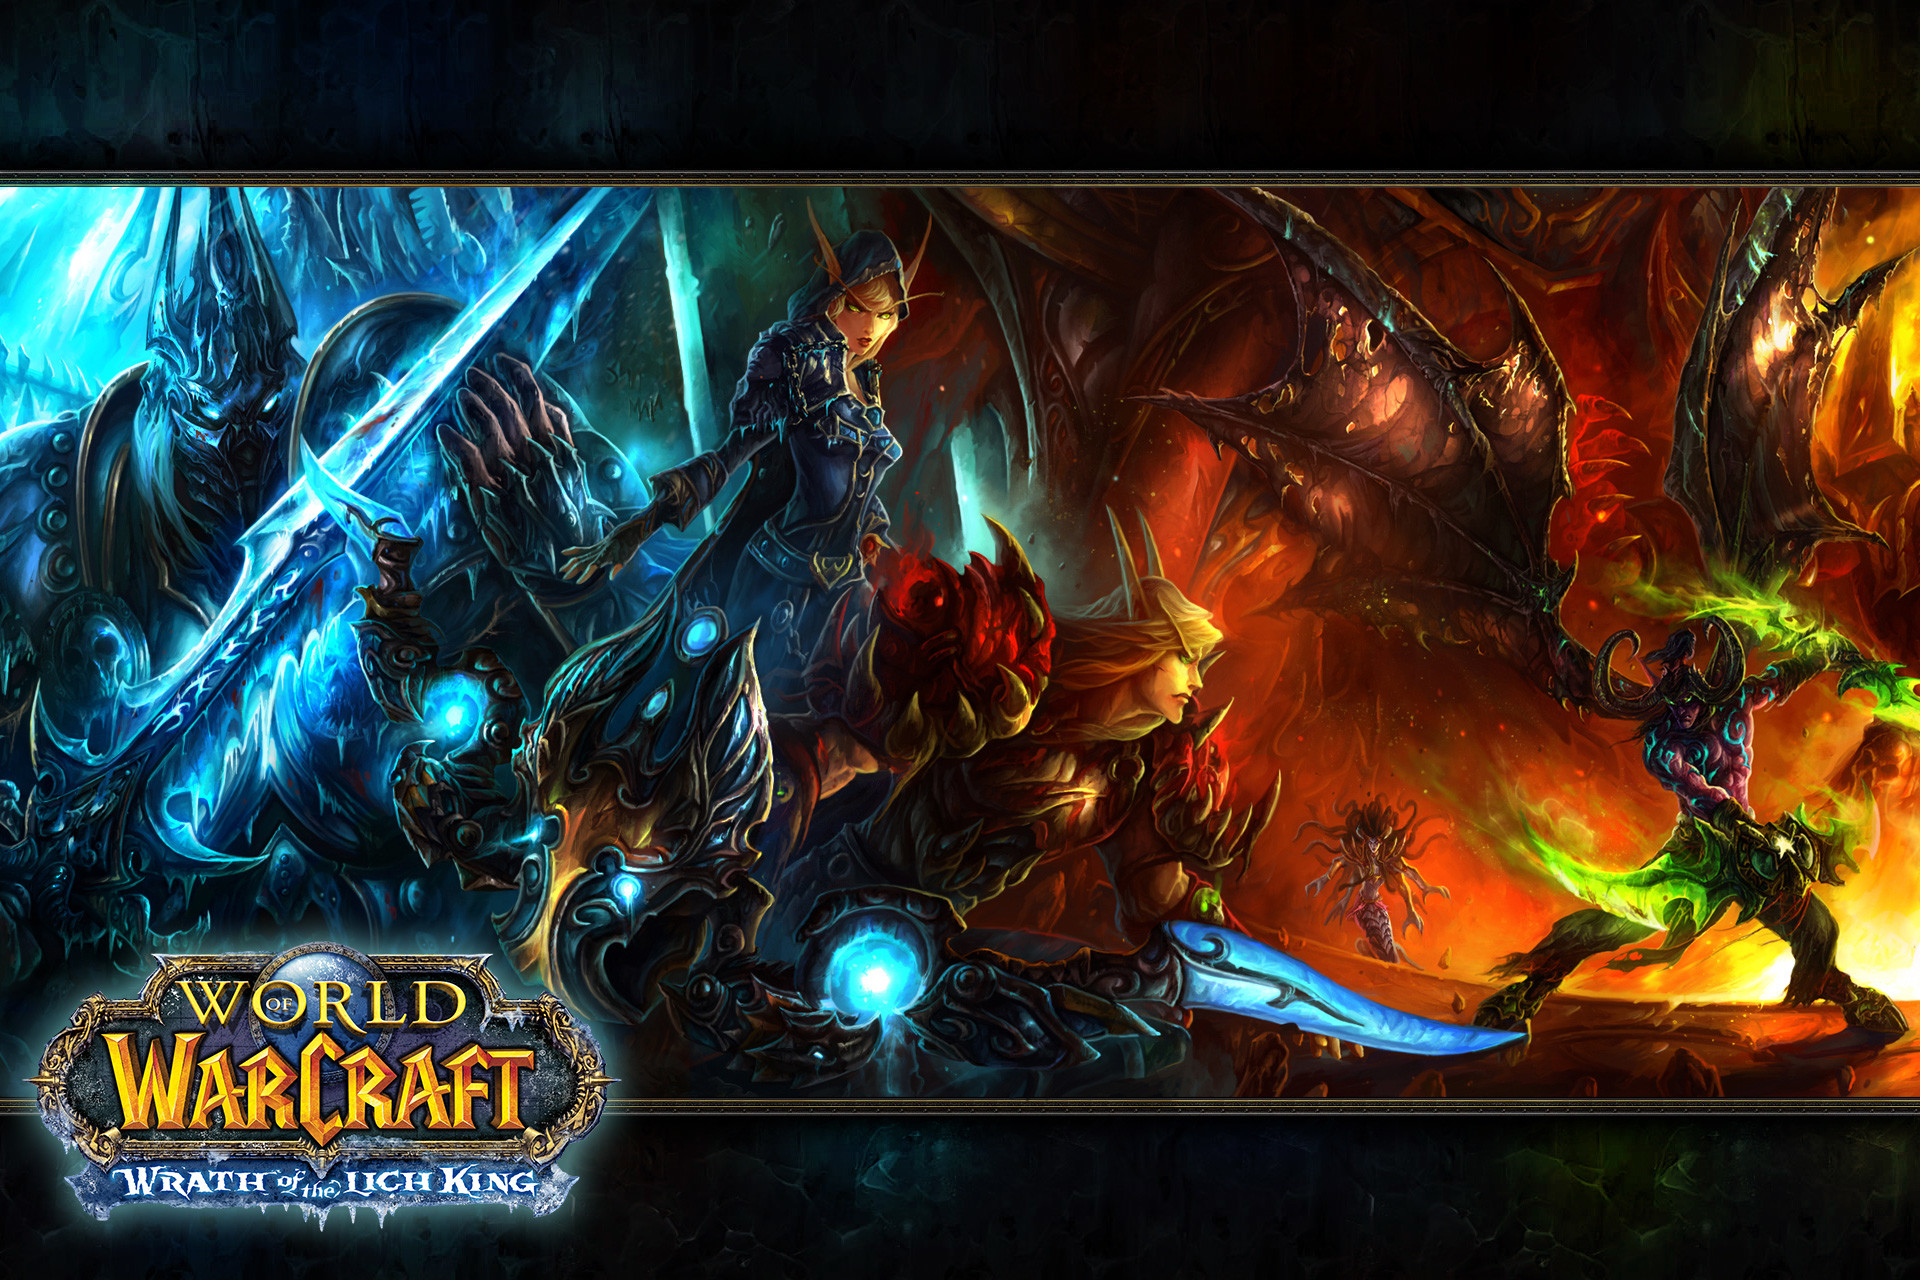 World Of Warcraft Wallpaper Wallpape Hd Game xpx Concept HD Wallpapers Pinterest Wallpaper, Wallpaper backgrounds and Warcraft legion